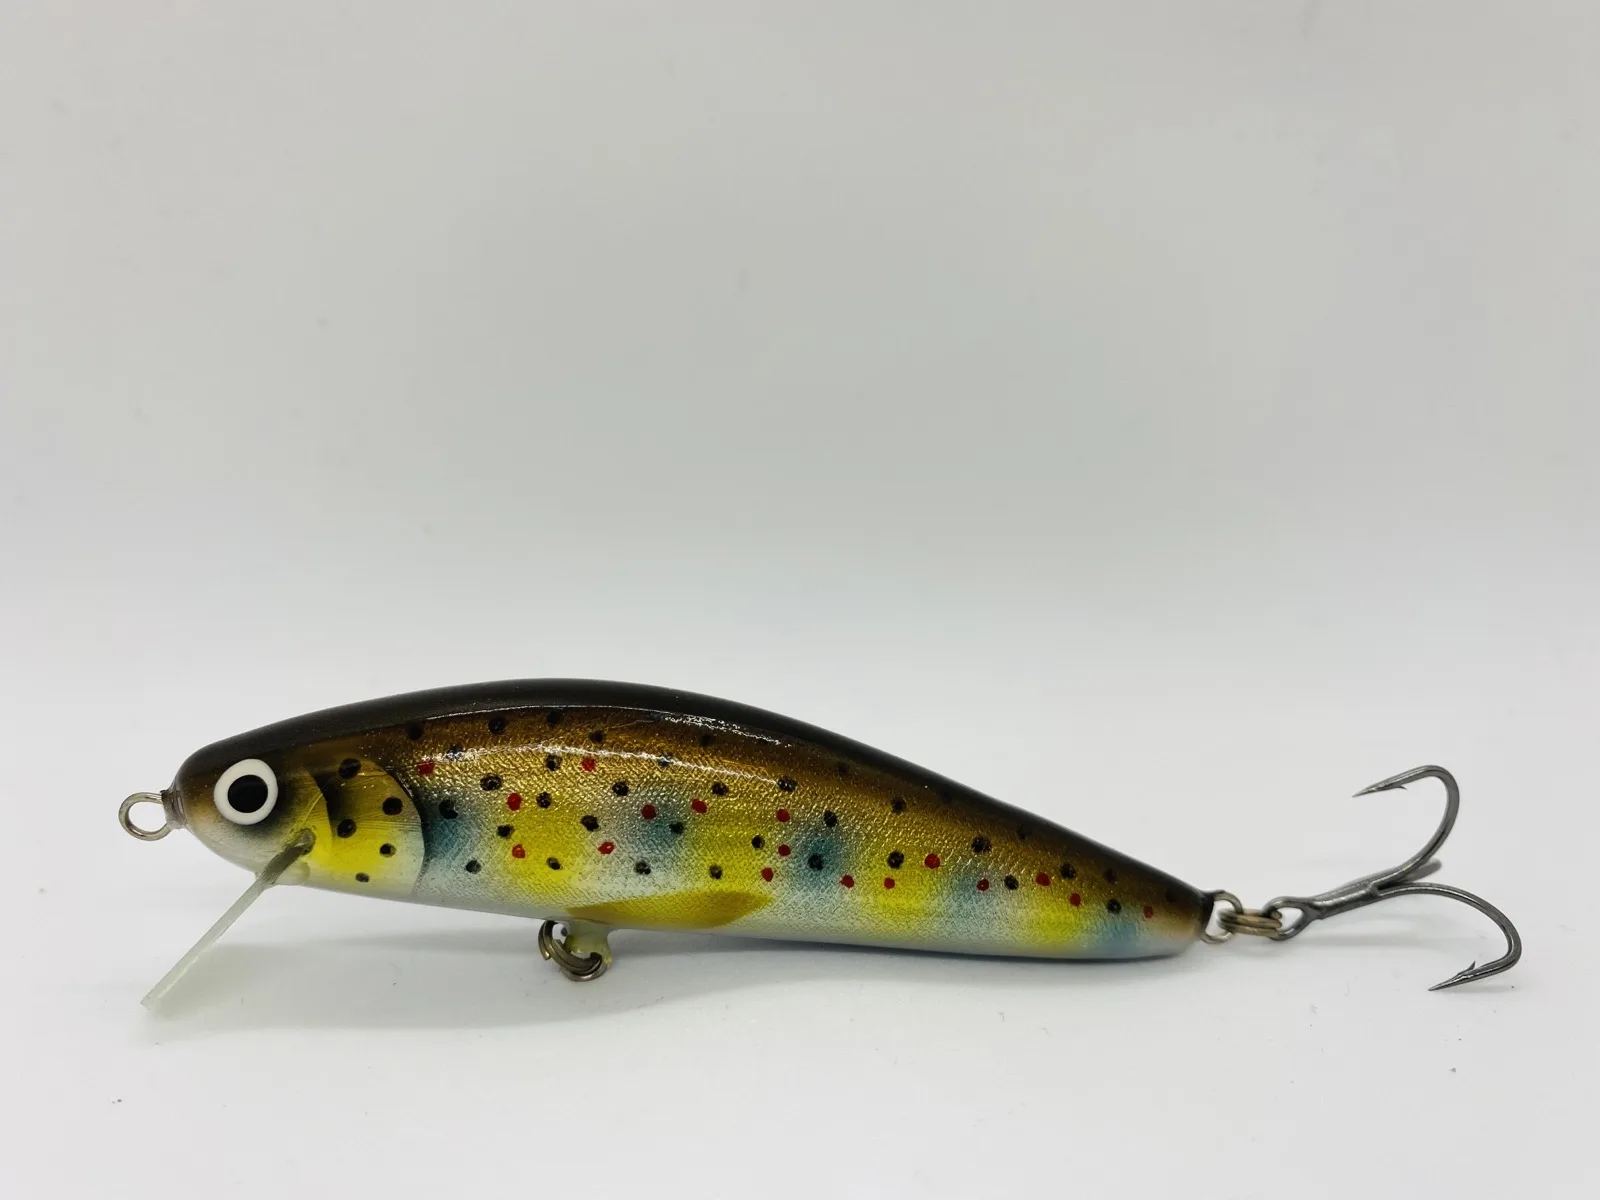 M Contact – Brown Trout “The Bull Trout Magnet” 9cm – CST Handmade